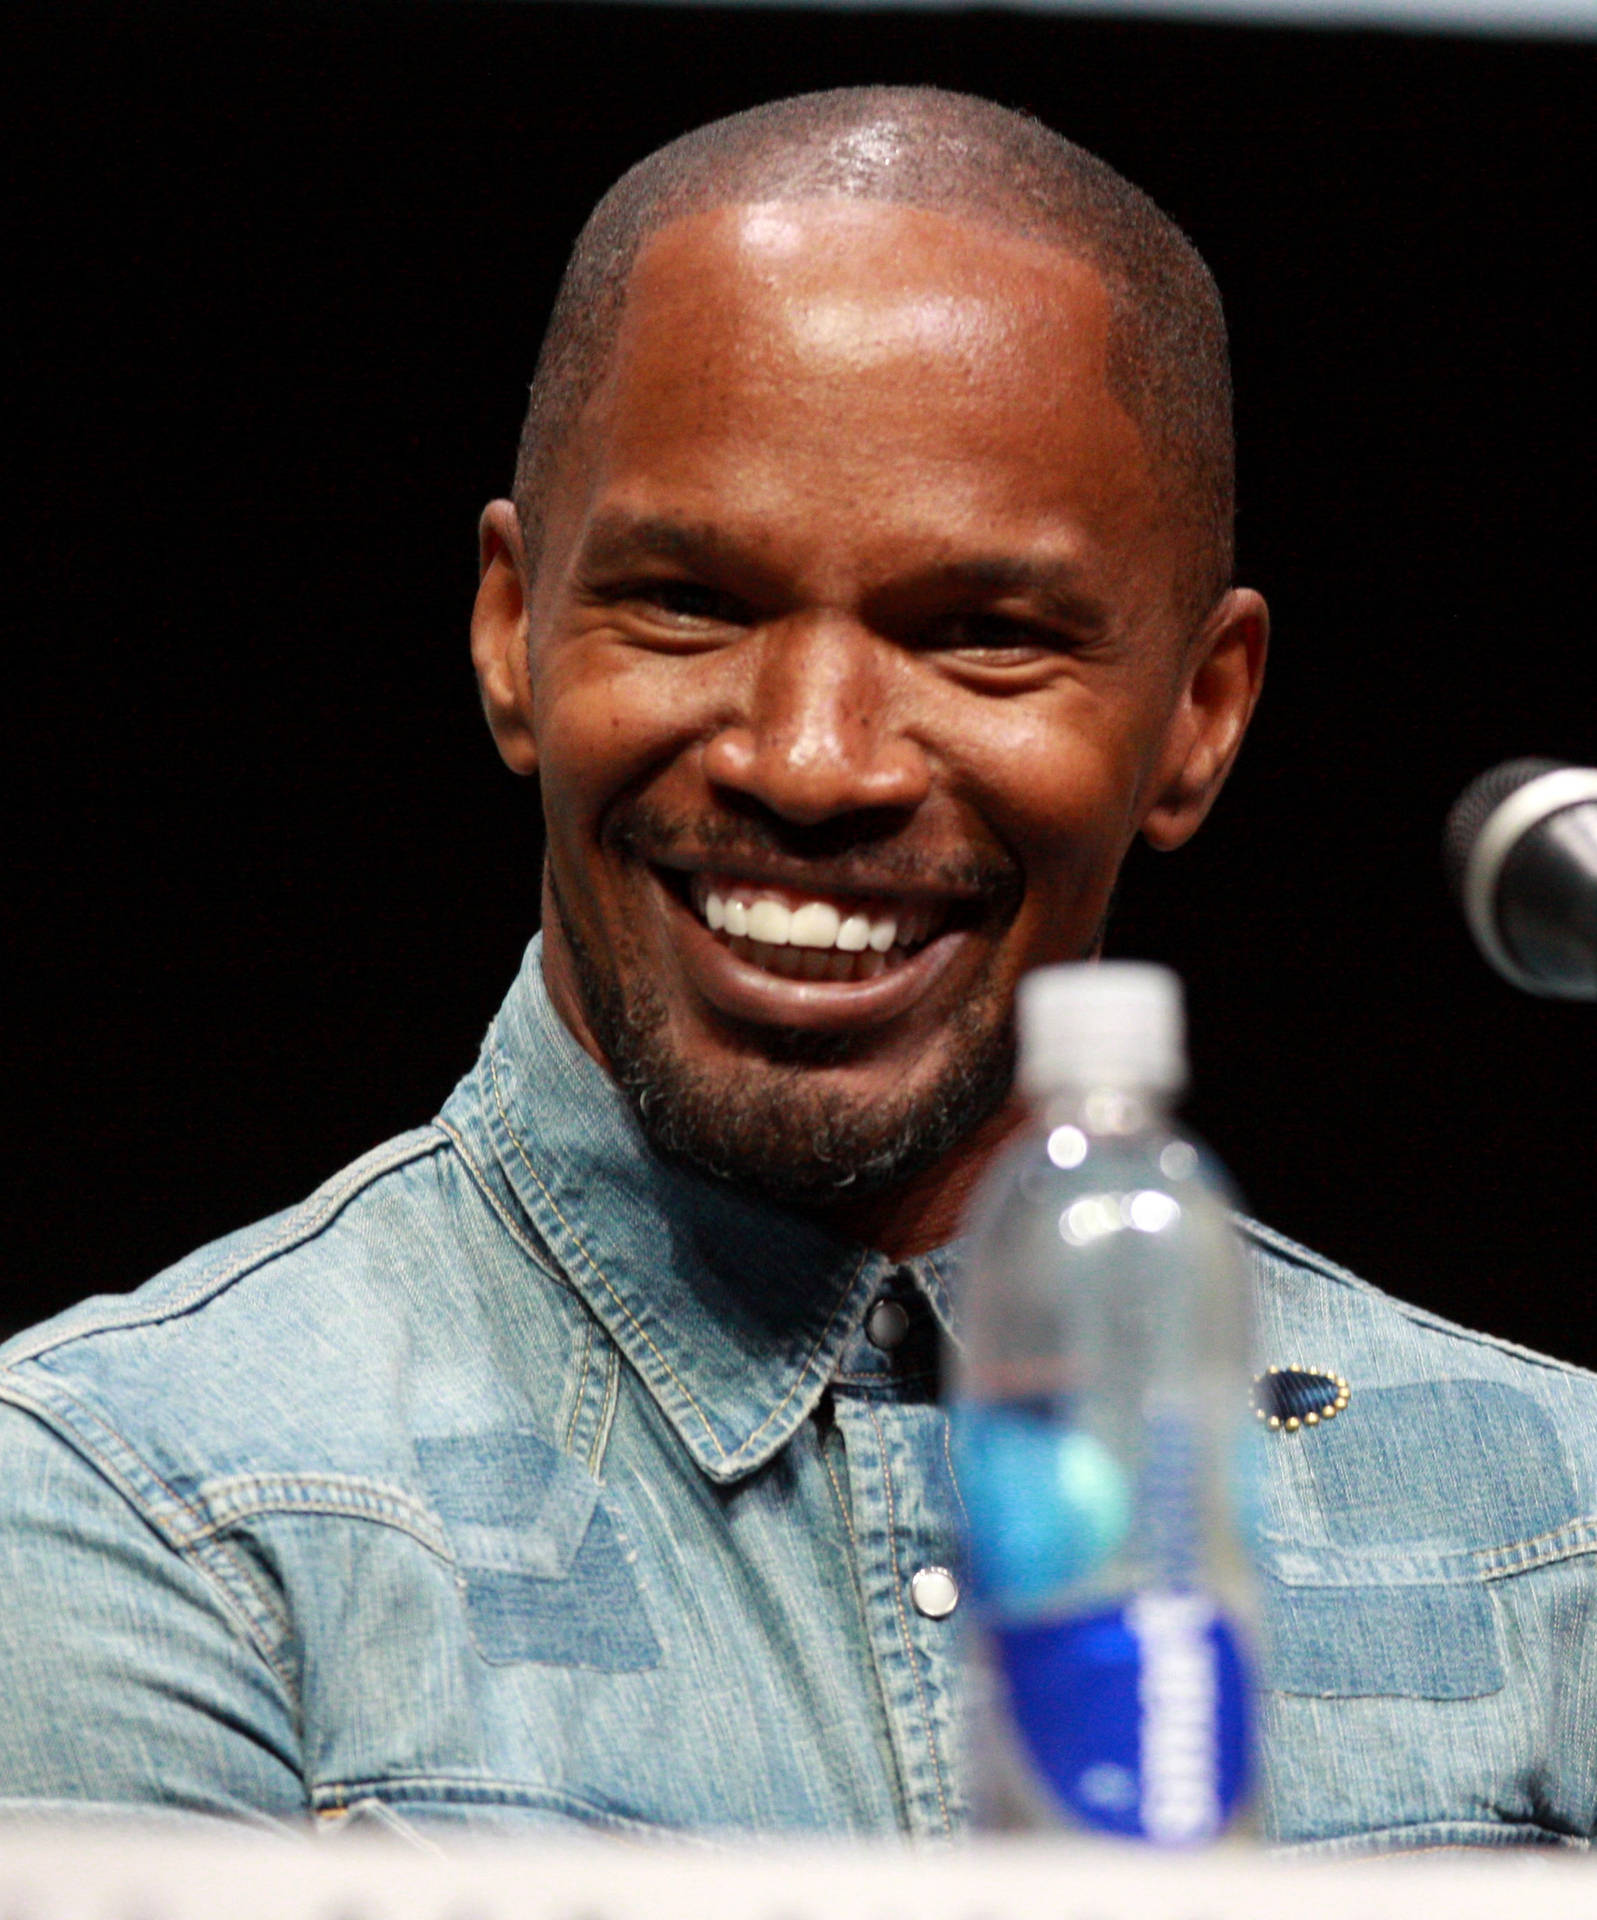 Jamie Foxx Grins Happily While Attending The Golden Globe Awards. Background